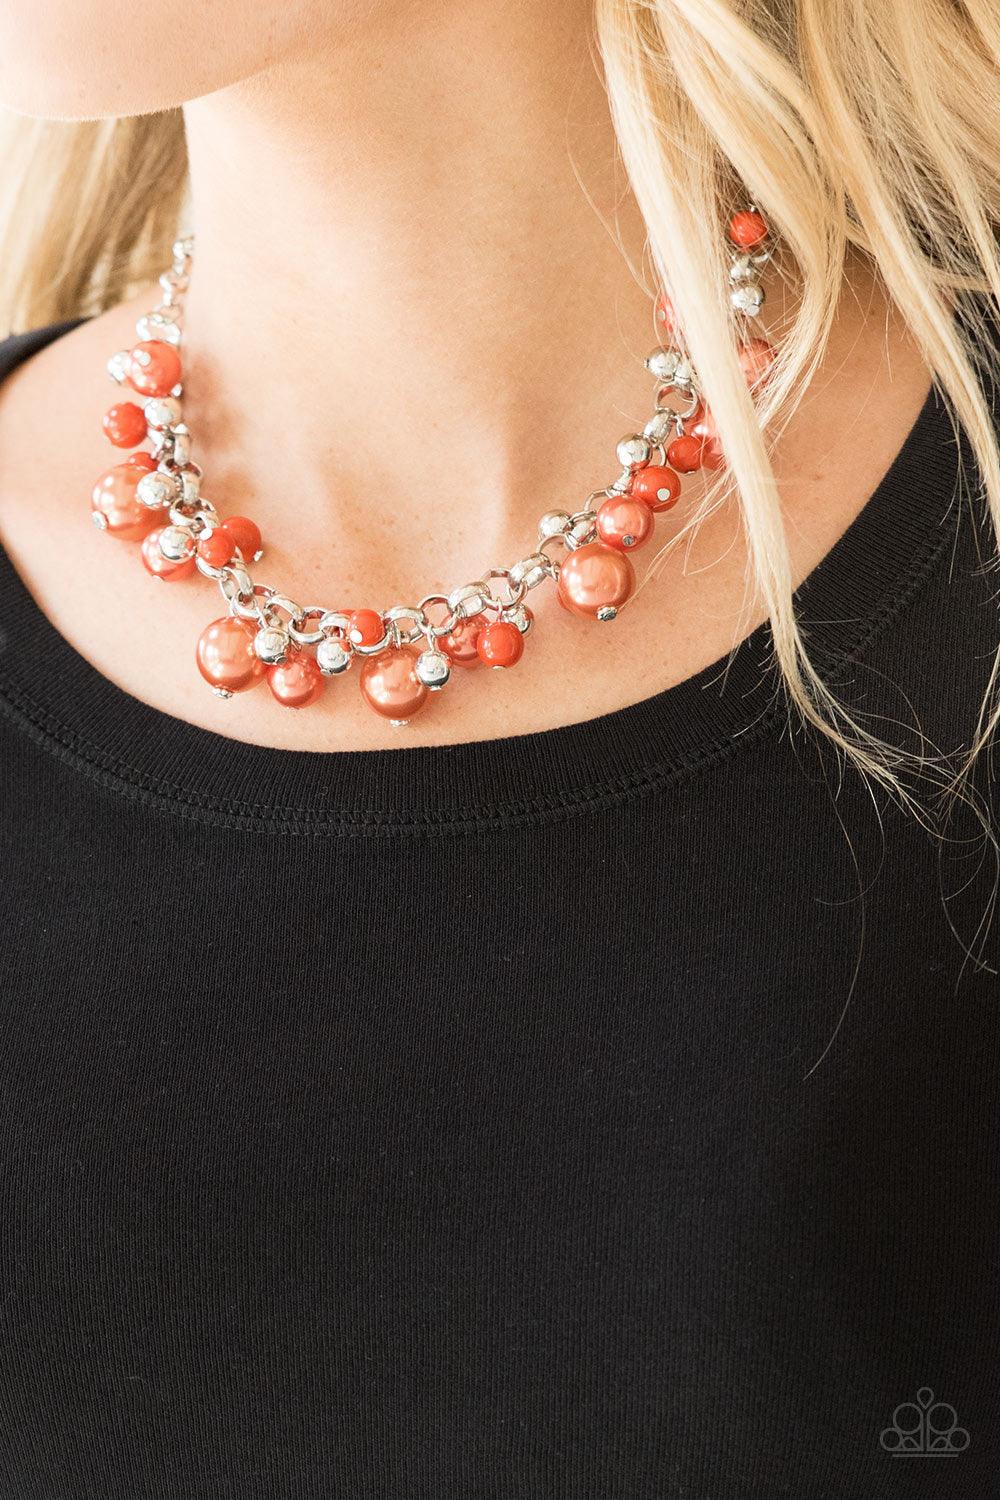 Paparazzi Accessories The Upstater - Orange Varying in size, bubbly orange pearls, classic silver beads, and shiny orange beads swing from the bottom of a glistening silver chain, creating a refined fringe below the collar. Features an adjustable clasp cl